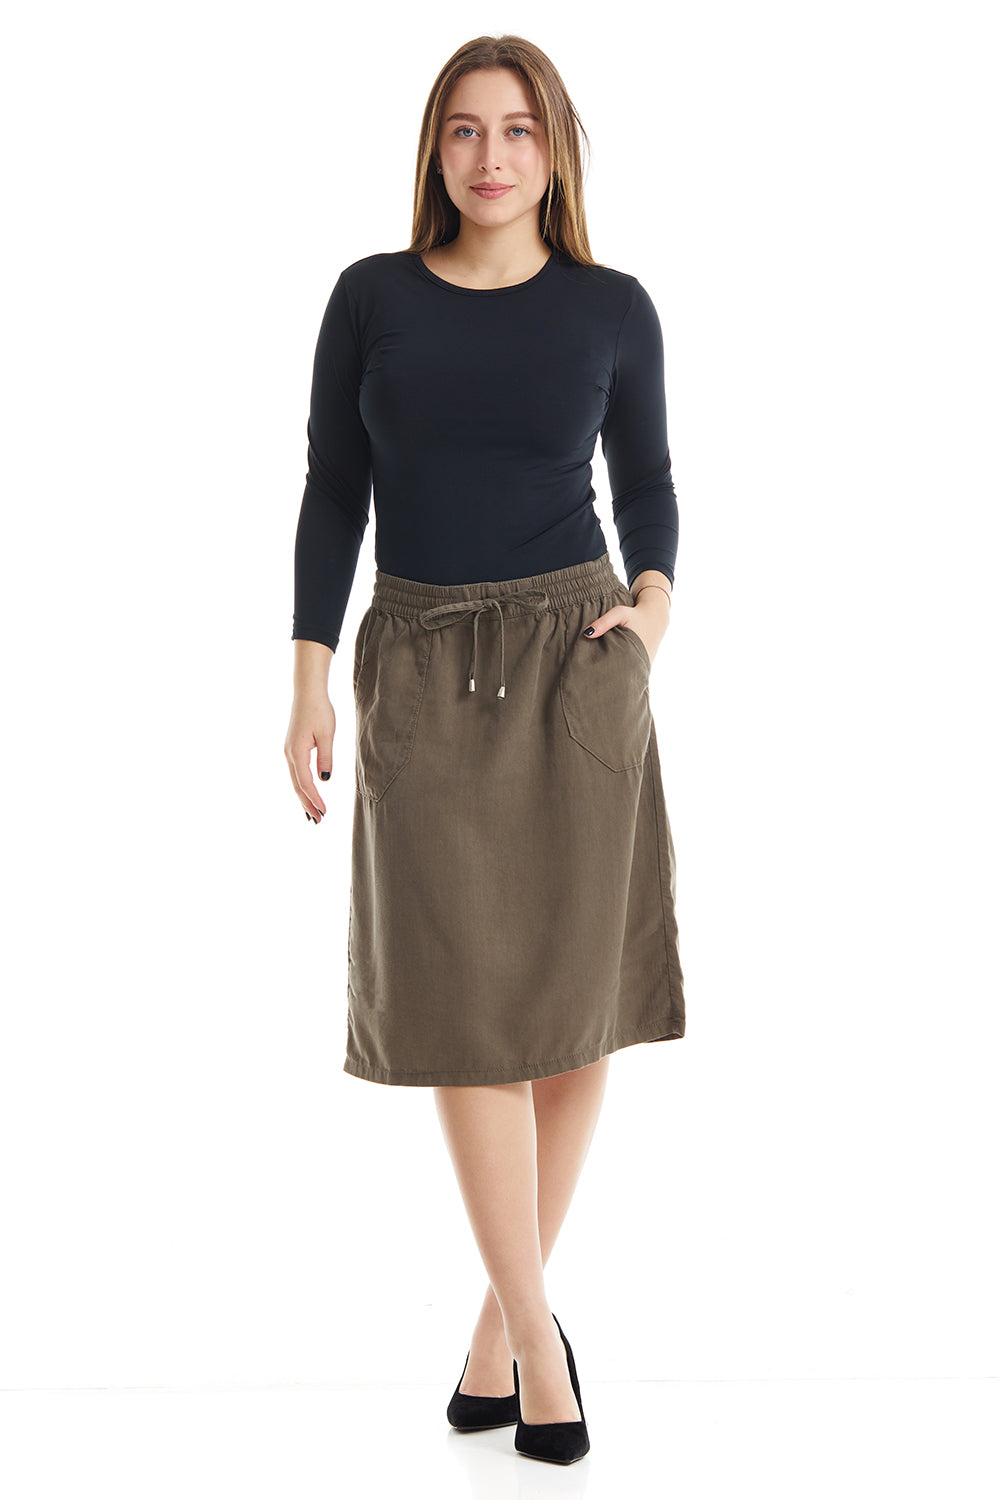 olive green pull on skirt with elastic waistband and drawstring closure